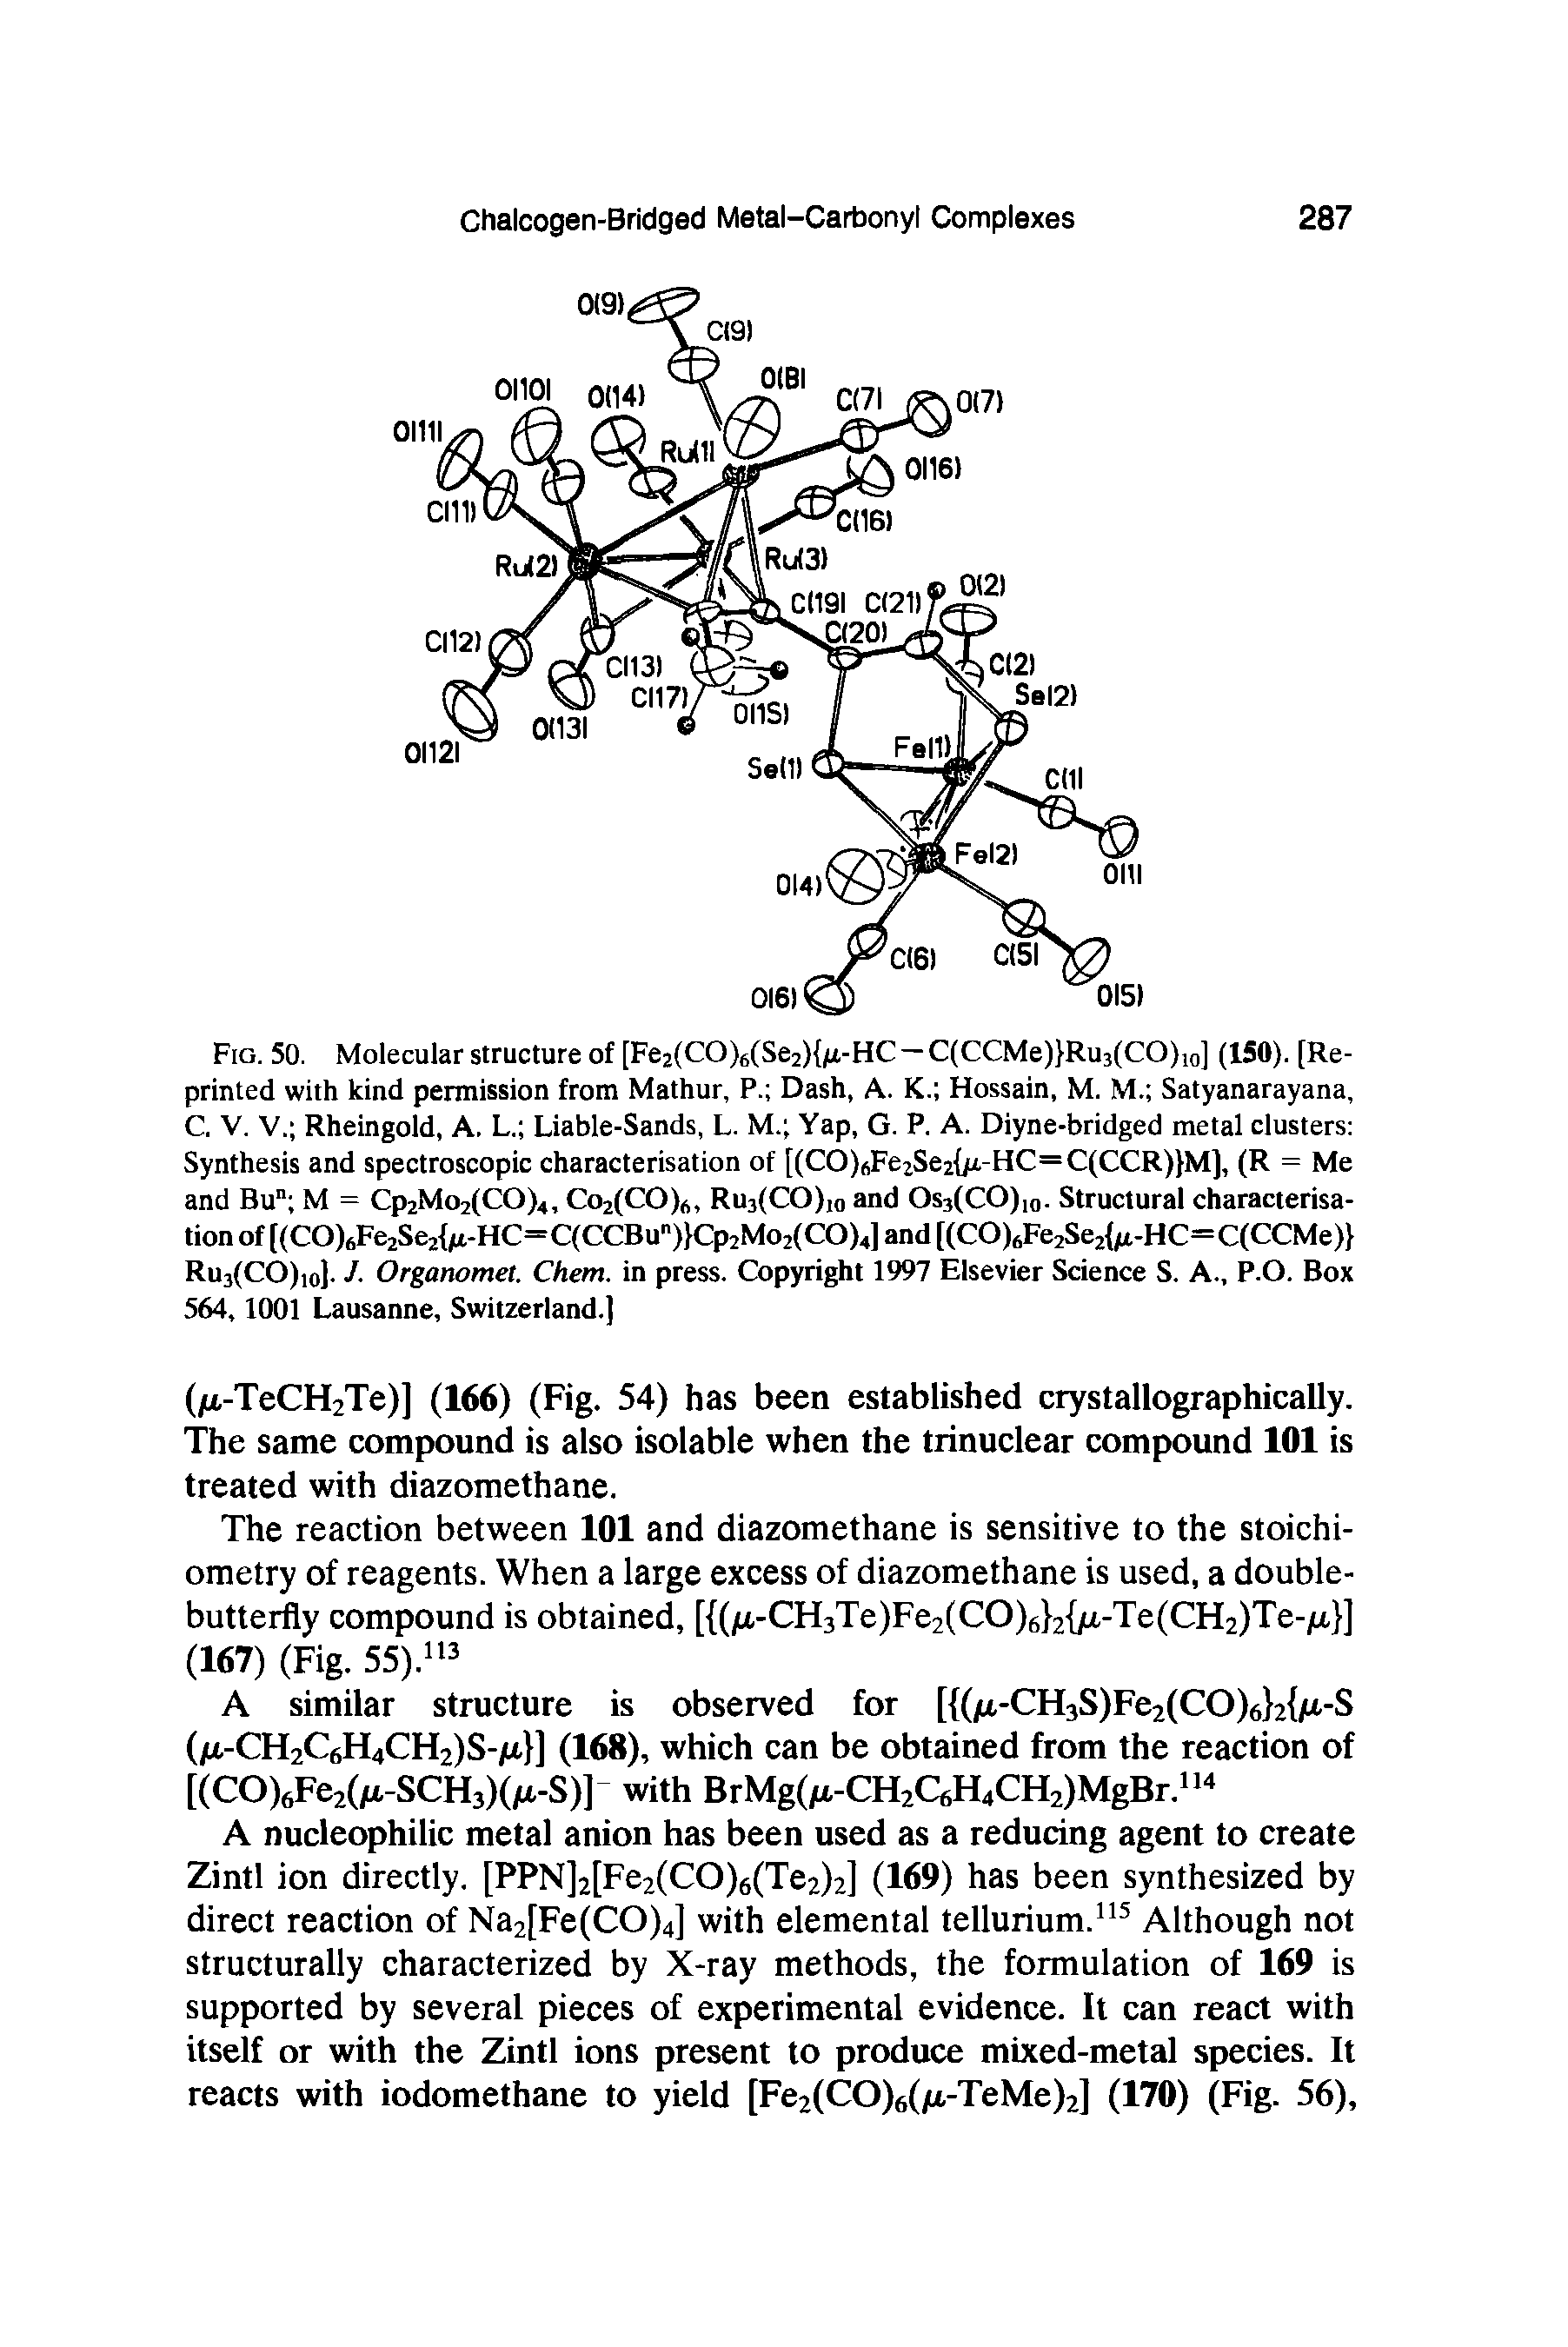 Fig. 50. Molecular structure of [Fe2(CO)6(Se2) jU.-HC — C(CCMe) Ru3(CO)10] (150). [Reprinted with kind permission from Mathur, P. Dash, A. K. Hossain, M. M. Satyanarayana, C. V. V. Rheingold, A. L. Liable-Sands, L. M. Yap, G. P. A. Diyne-bridged metal clusters Synthesis and spectroscopic characterisation of [(CO)6Fe2Se2 /i-HC=C(CCR) M), (R = Me and Bu" M = Cp2Mo2(CO)4, Co2(CO)6, Ru3(CO)i0 and Os3(CO)10. Structural characterisation of [(CO)6Fe2Se2 /i-HC=C(CCBun) Cp2Mo2(CO)4] and [(CO)6Fe2Se2 /t-HC=C(CCMe) Ru3(CO)io]. J- Organomet. Chem. in press. Copyright 1997 Elsevier Science S. A., P.O. Box 564,1001 Lausanne, Switzerland.]...